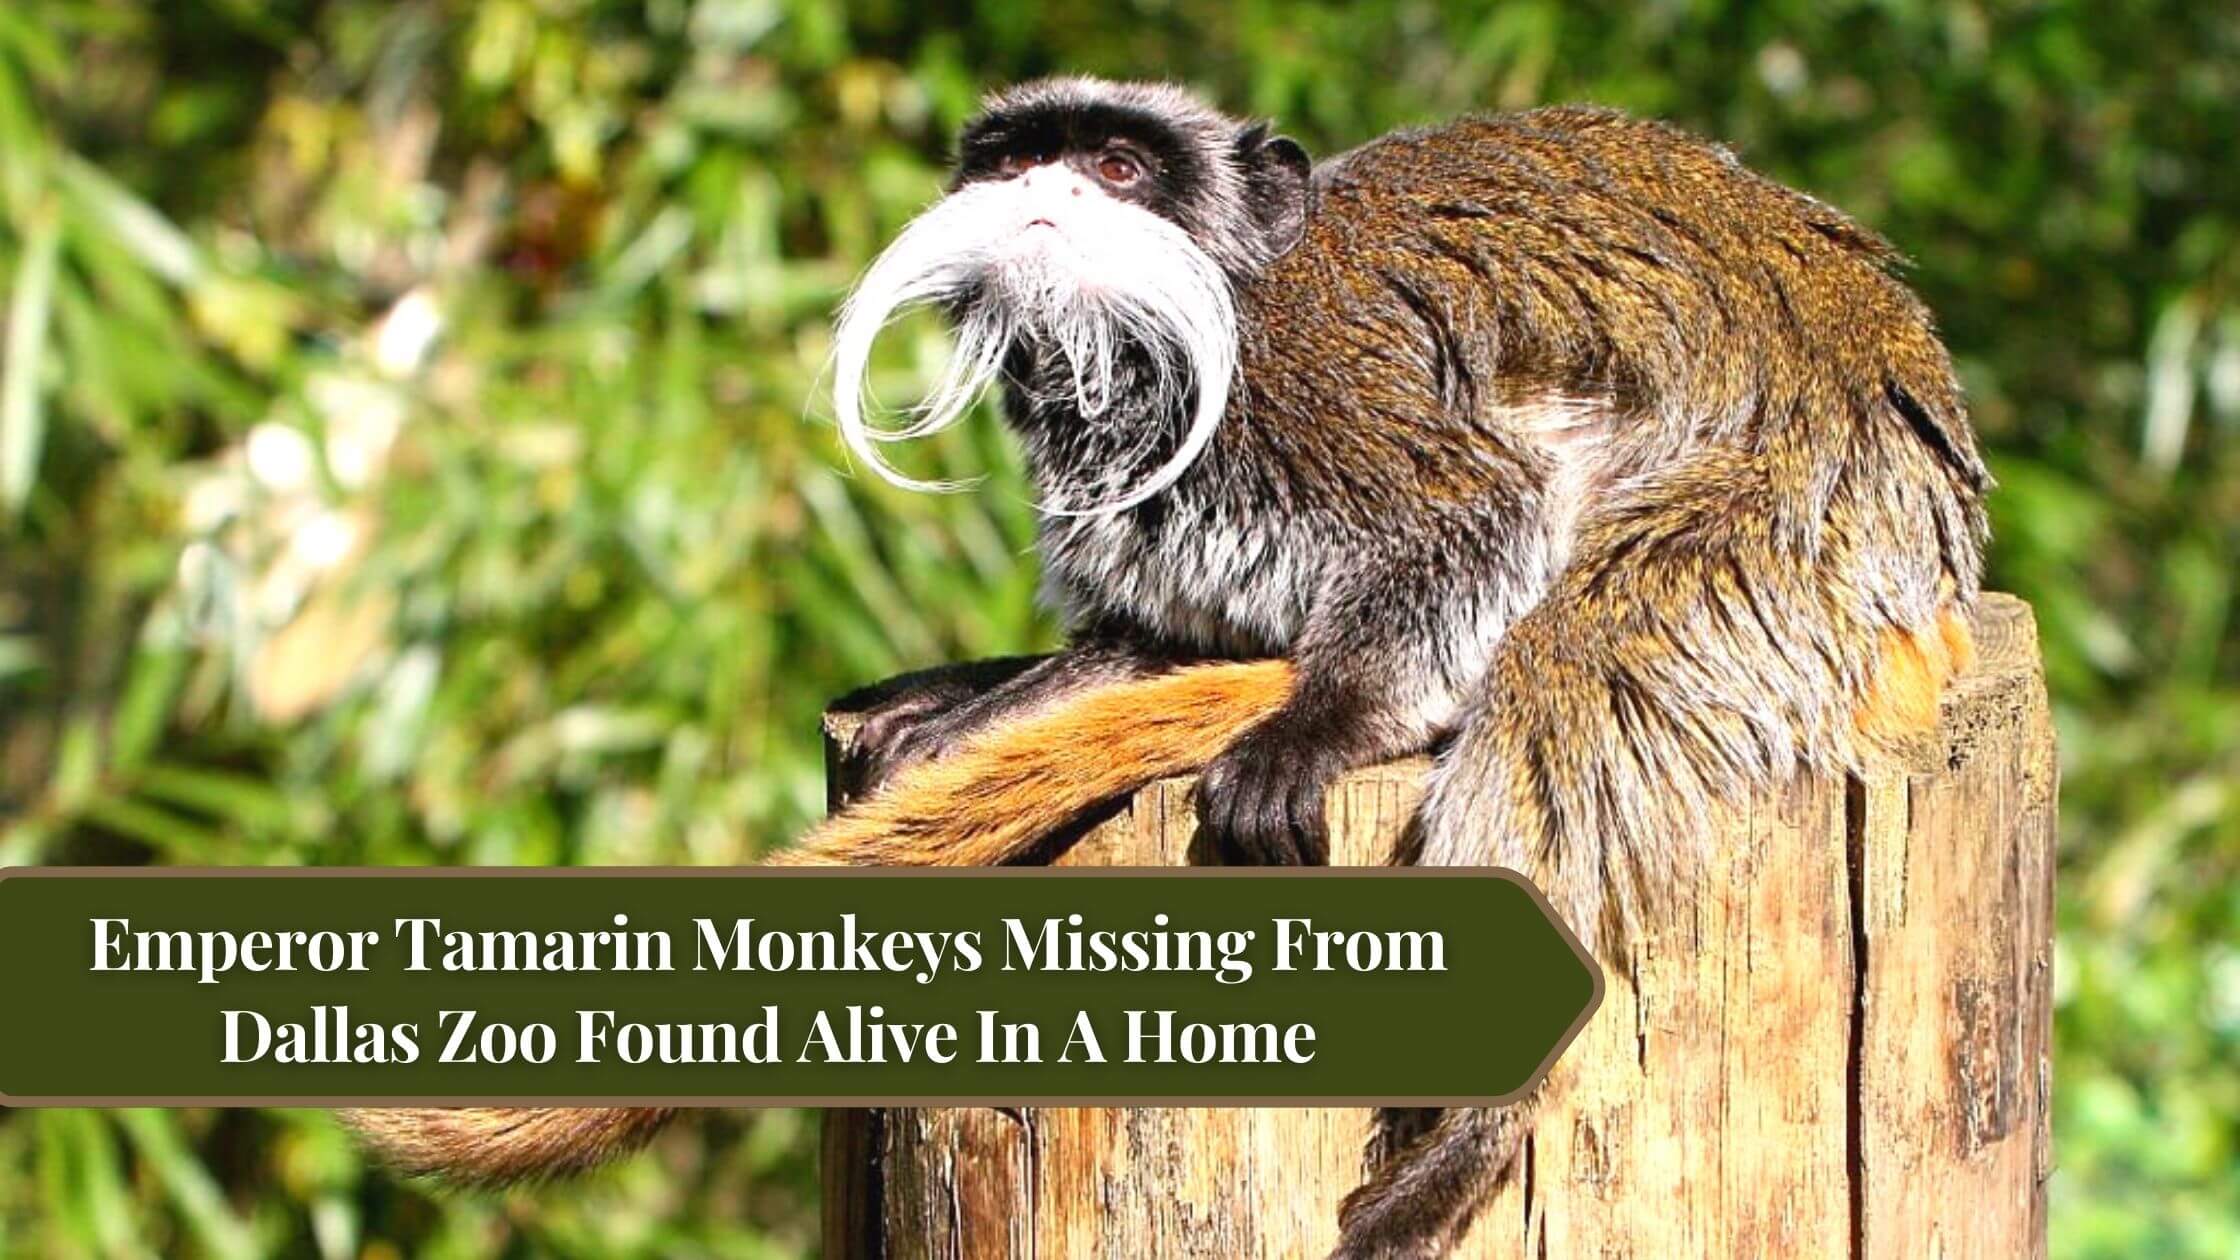 Emperor Tamarin Monkeys Missing From Dallas Zoo Found Alive In A Home